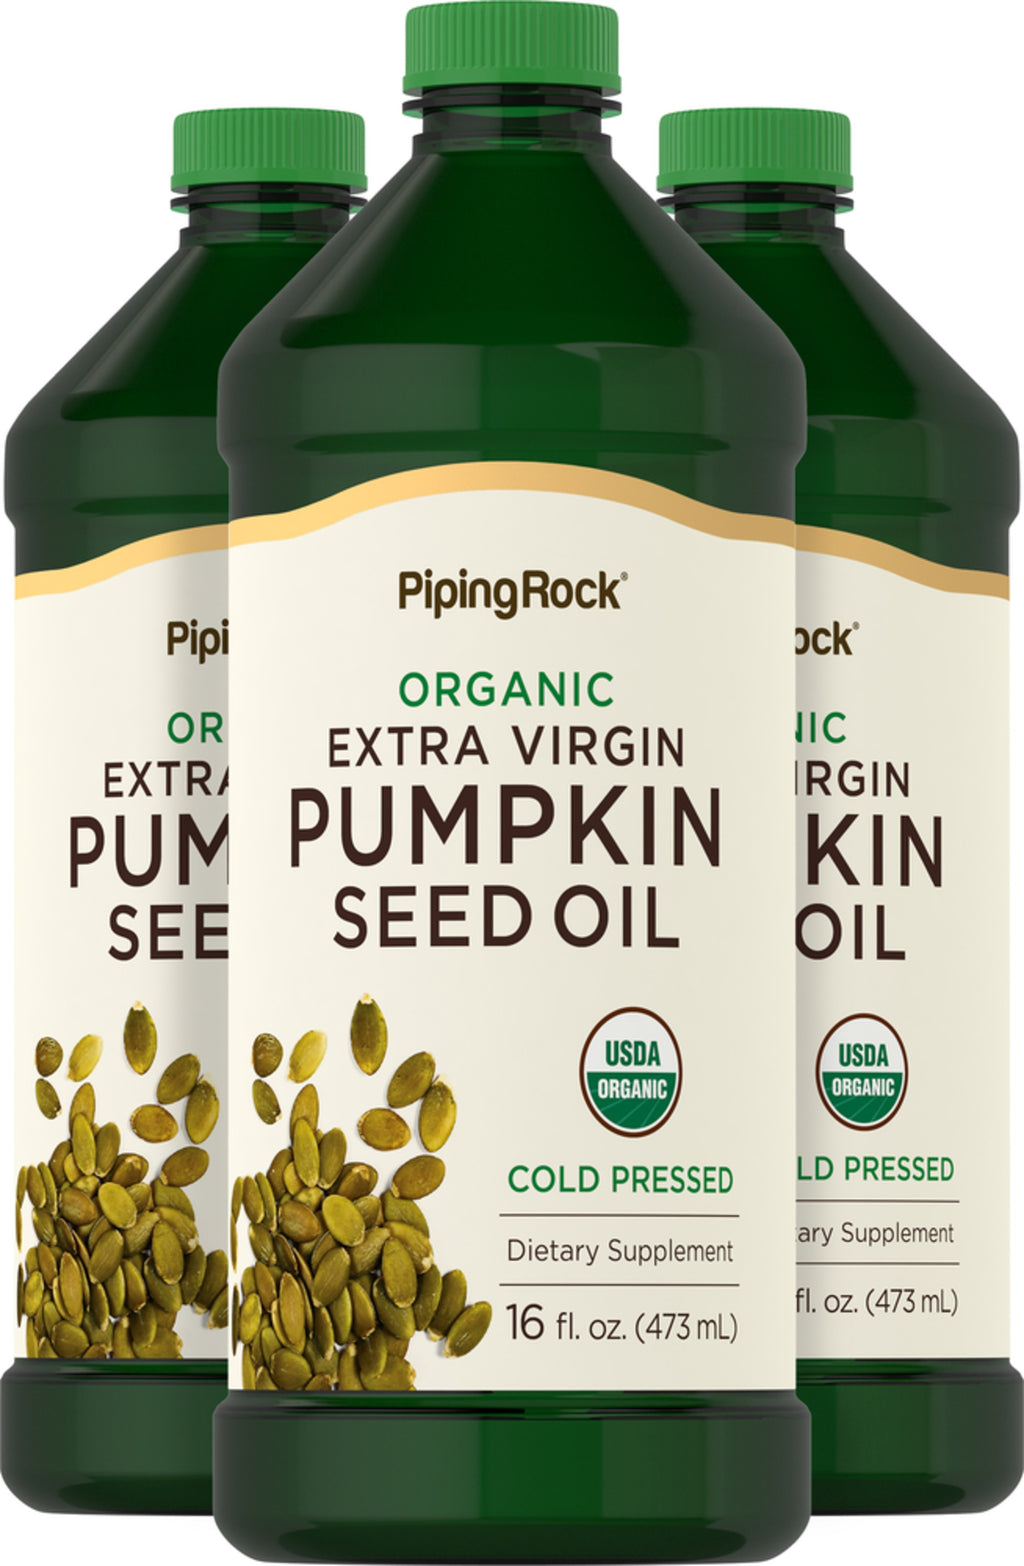 Hemp Seed Oil (Cold Pressed), 1400 mg (per serving), 180 Quick Release  Softgels